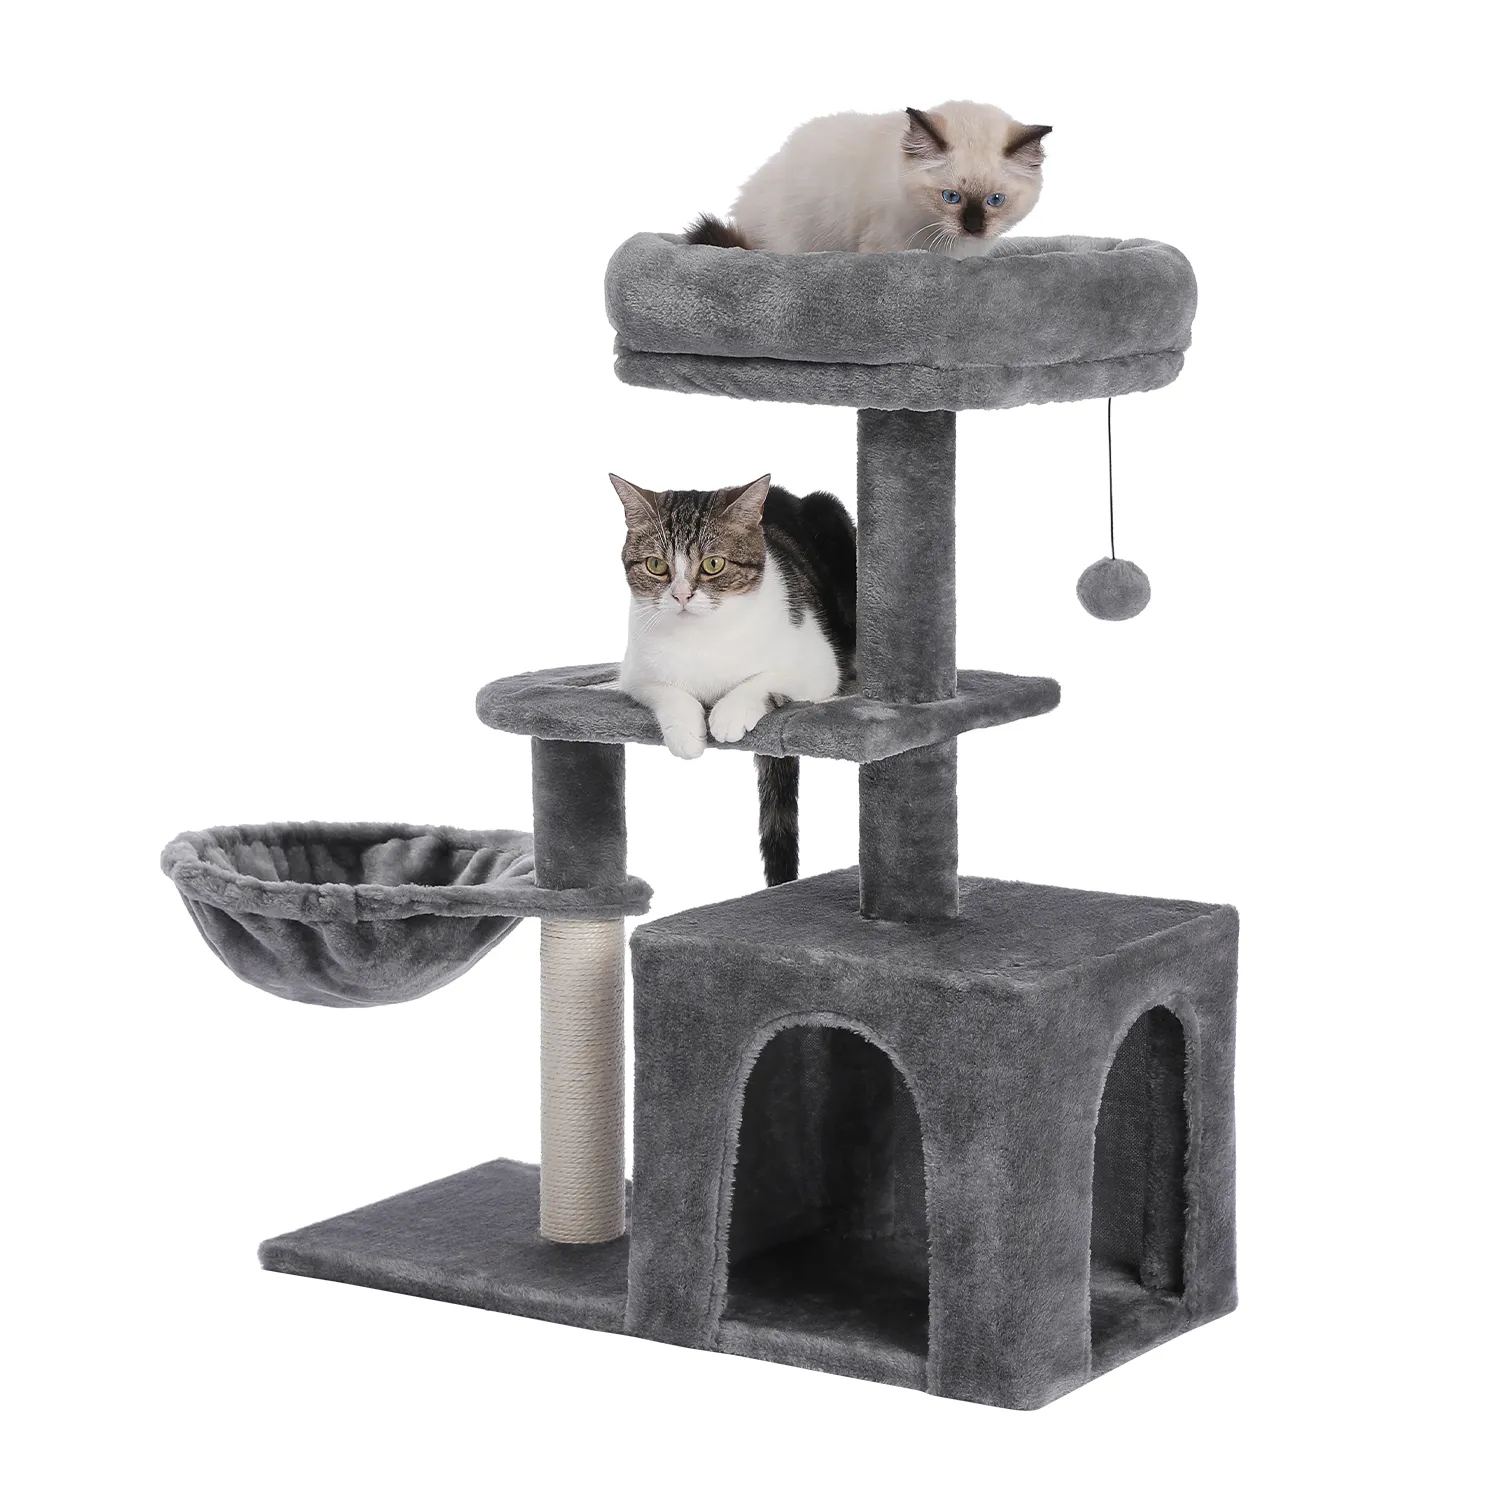 H70CM/80CM Small Cat Tree Condo with Natural Sisal-Covered Scratching Post for Kitten Cat Indoor Large Top Perch Cozy Hummock